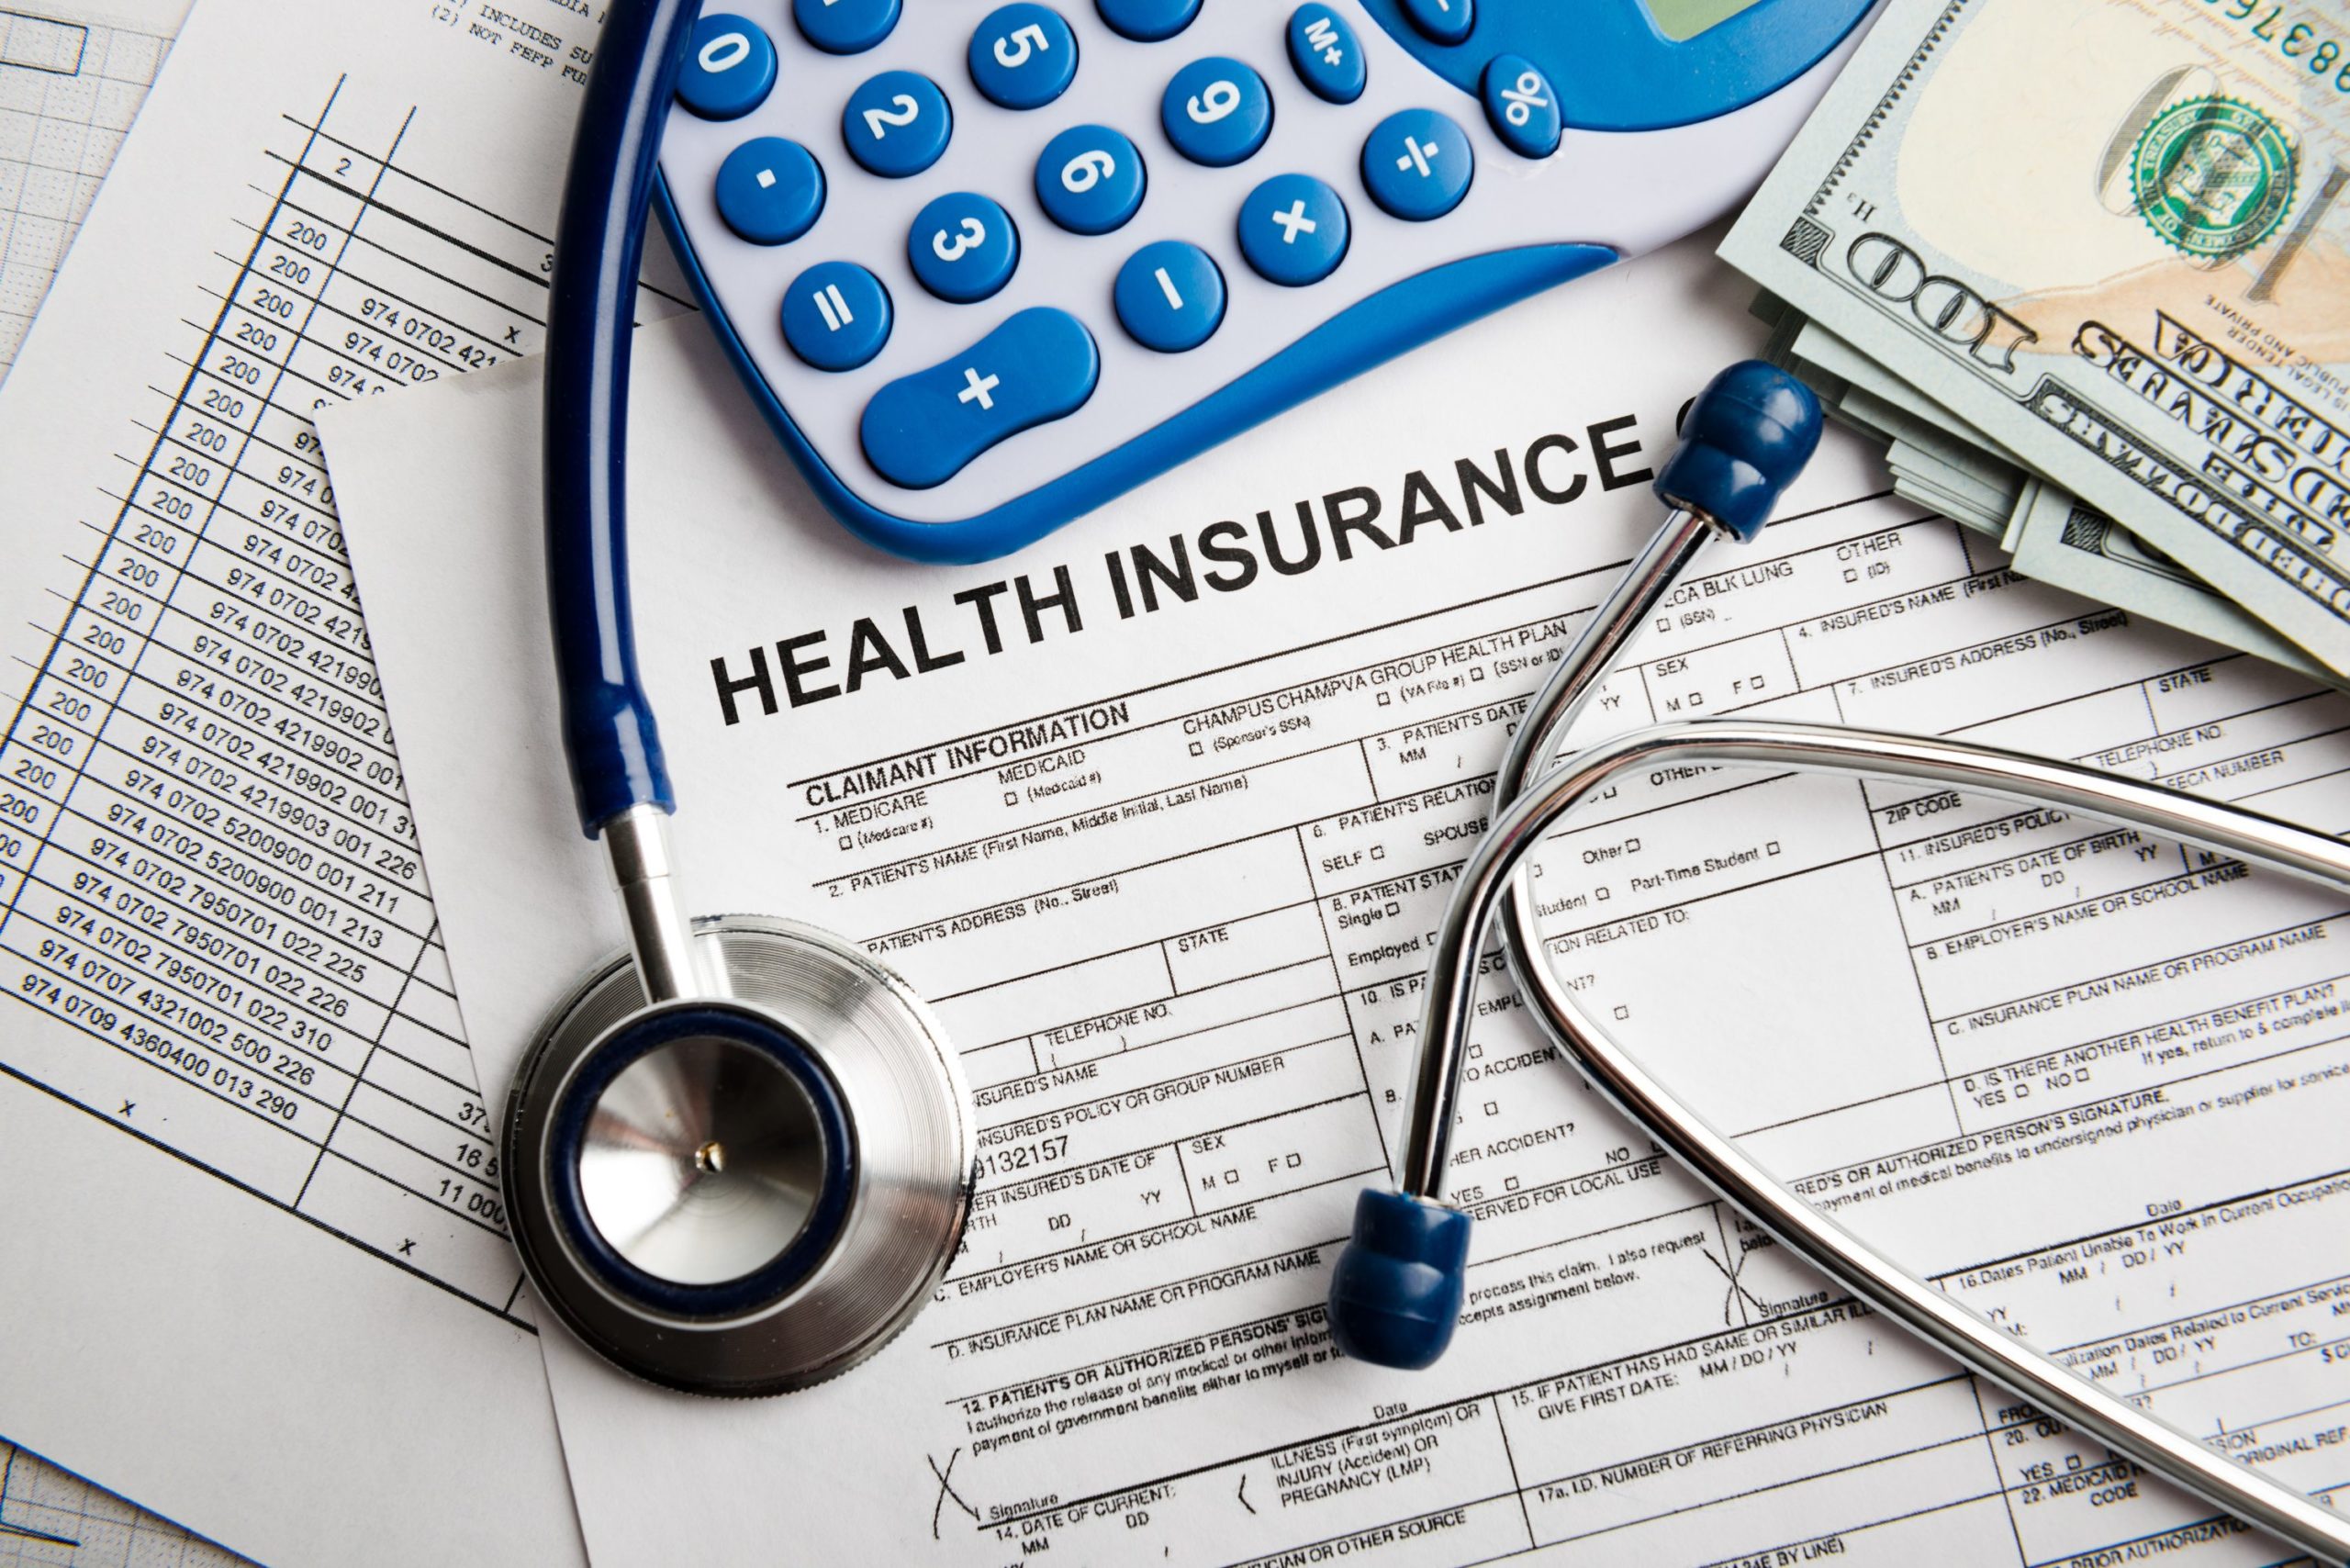 Health insurance in Singapore from G&M.